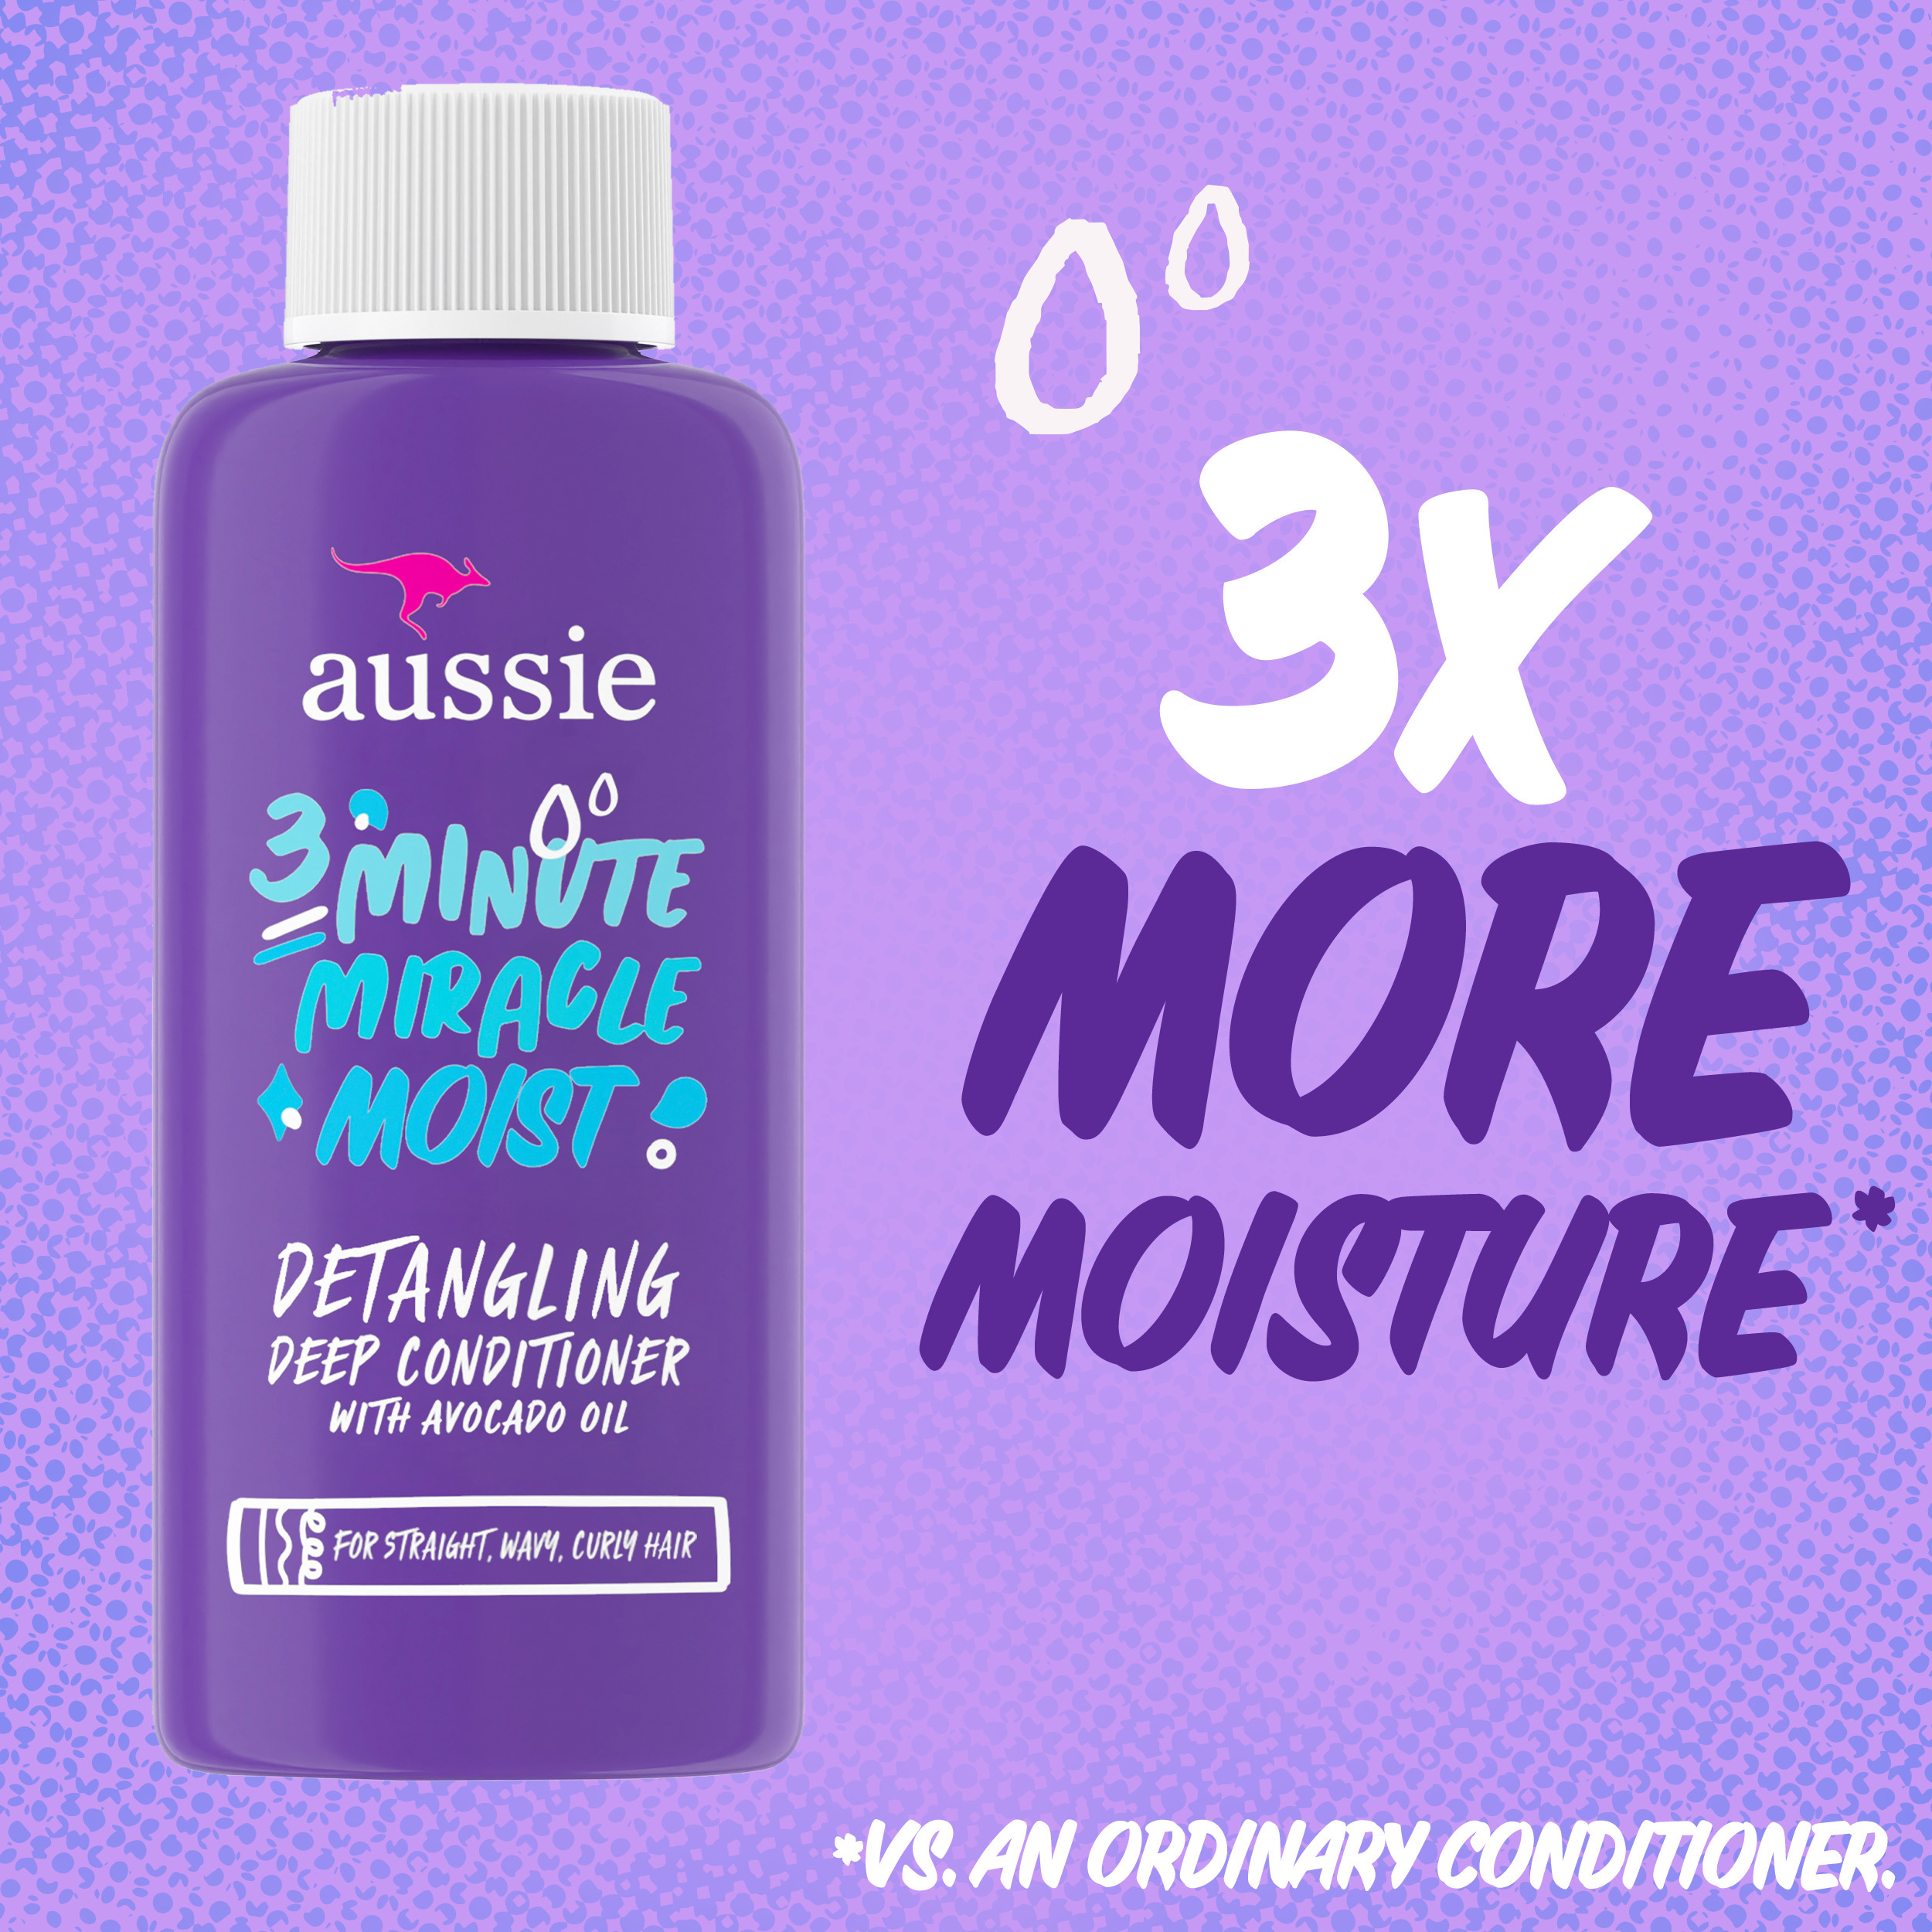 Aussie Miracle Moist 3 Minute Miracle Deep Conditioner with Avocado, Paraben Free, For All Hair Types 1.7 fl oz - image 5 of 12